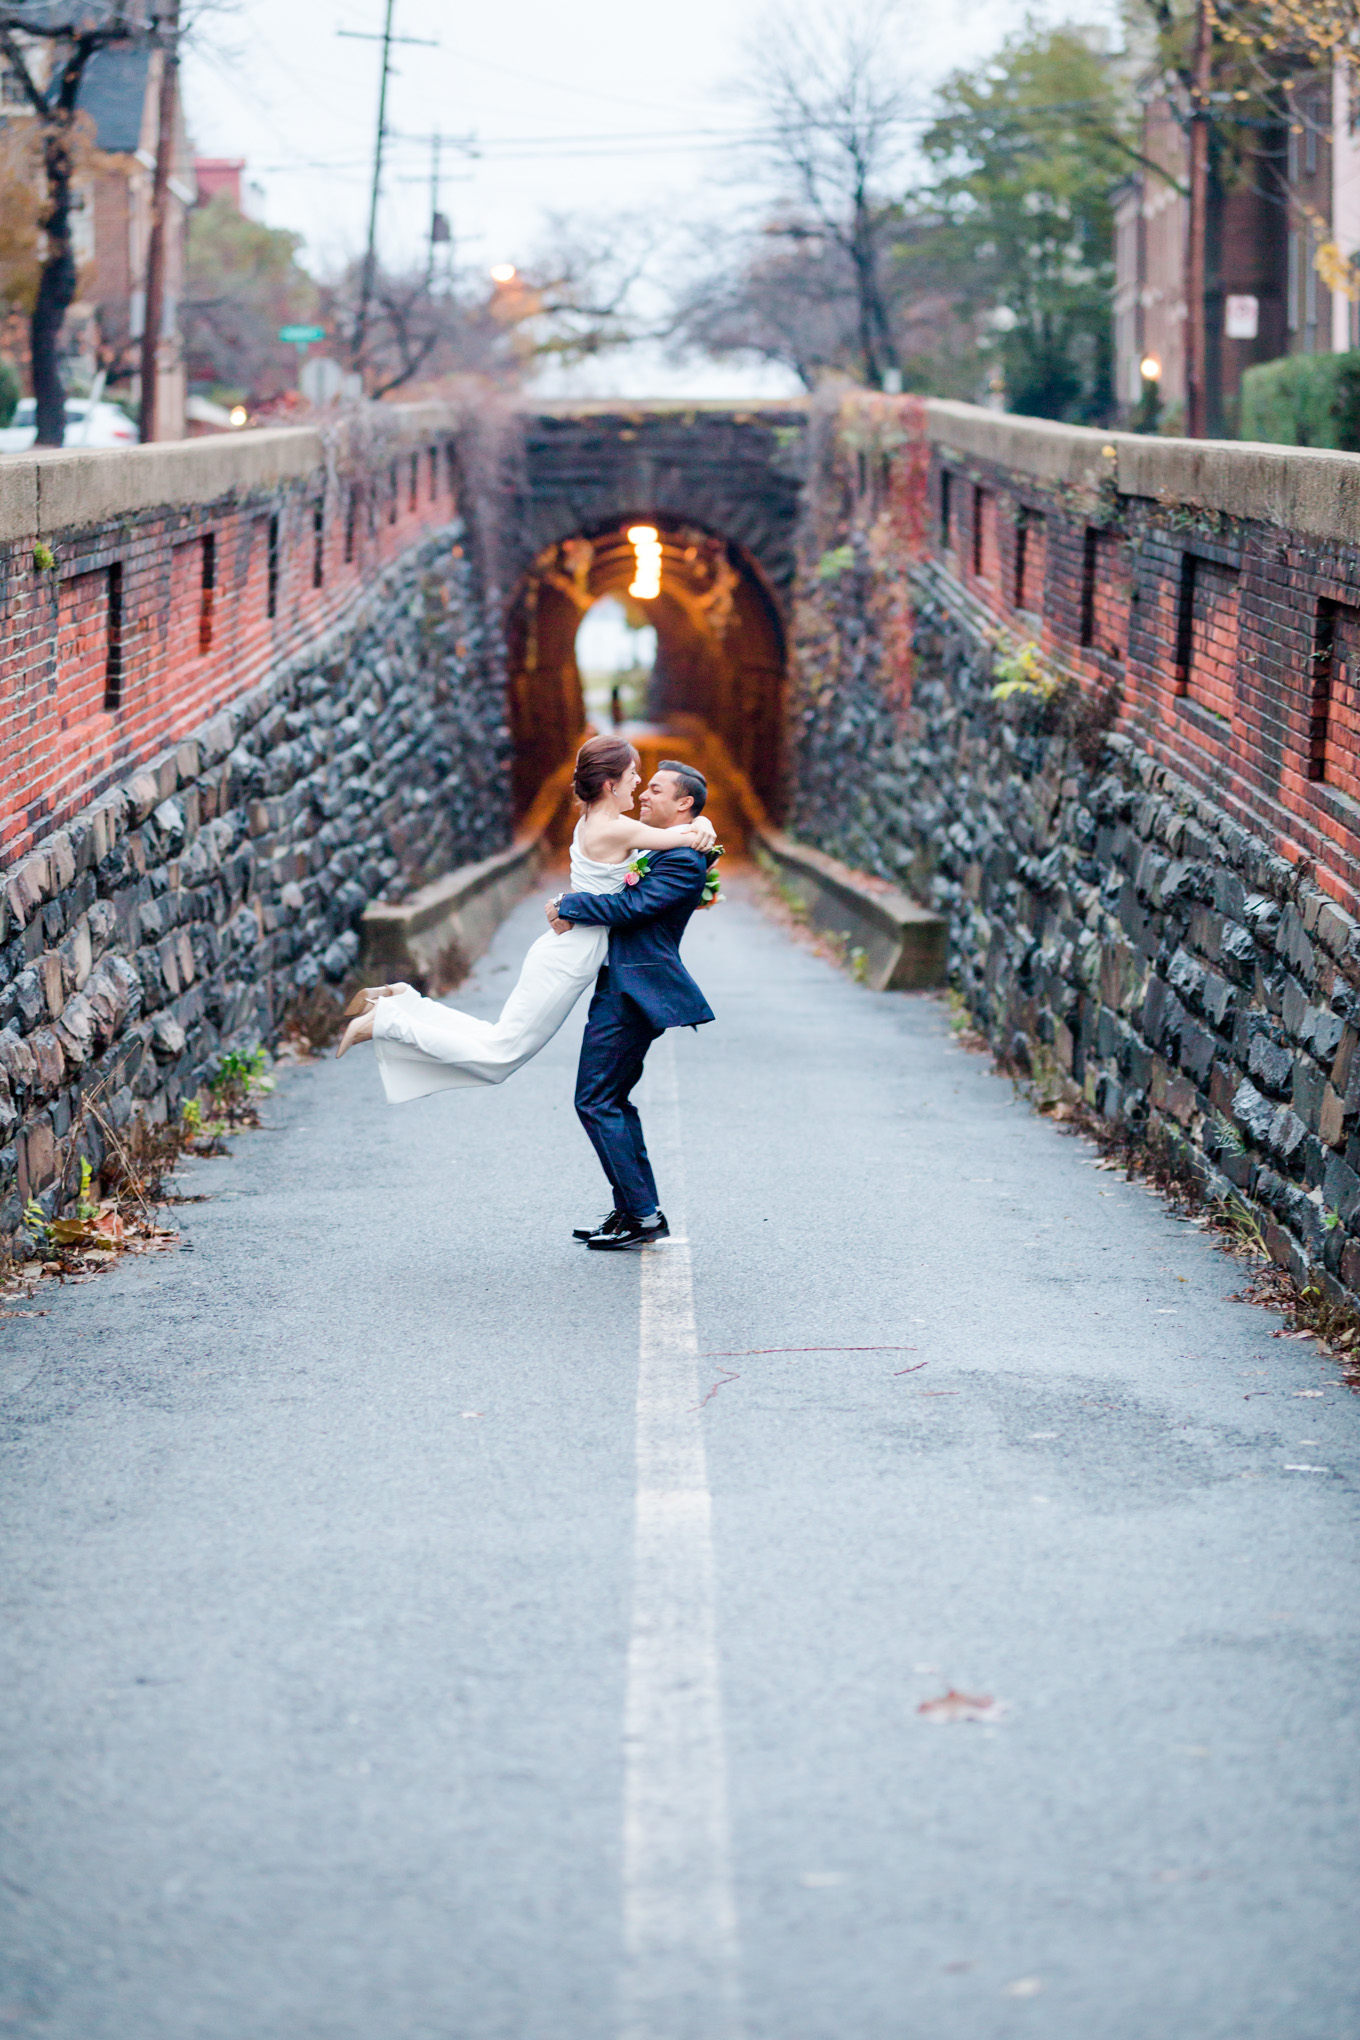 Old Town Alexandria wedding portraits, Old Town Alexandria, Alexandria wedding photos, Old Town Alexandria wedding photos, DC wedding photos, Indian wedding, stylish couple, couple goals, relationship goals, newlywed portraits, wedding portraits, bride and groom portraits, Rachel E.H. Photography, autumn wedding photos, DC wedding photographer, groom twirling bride